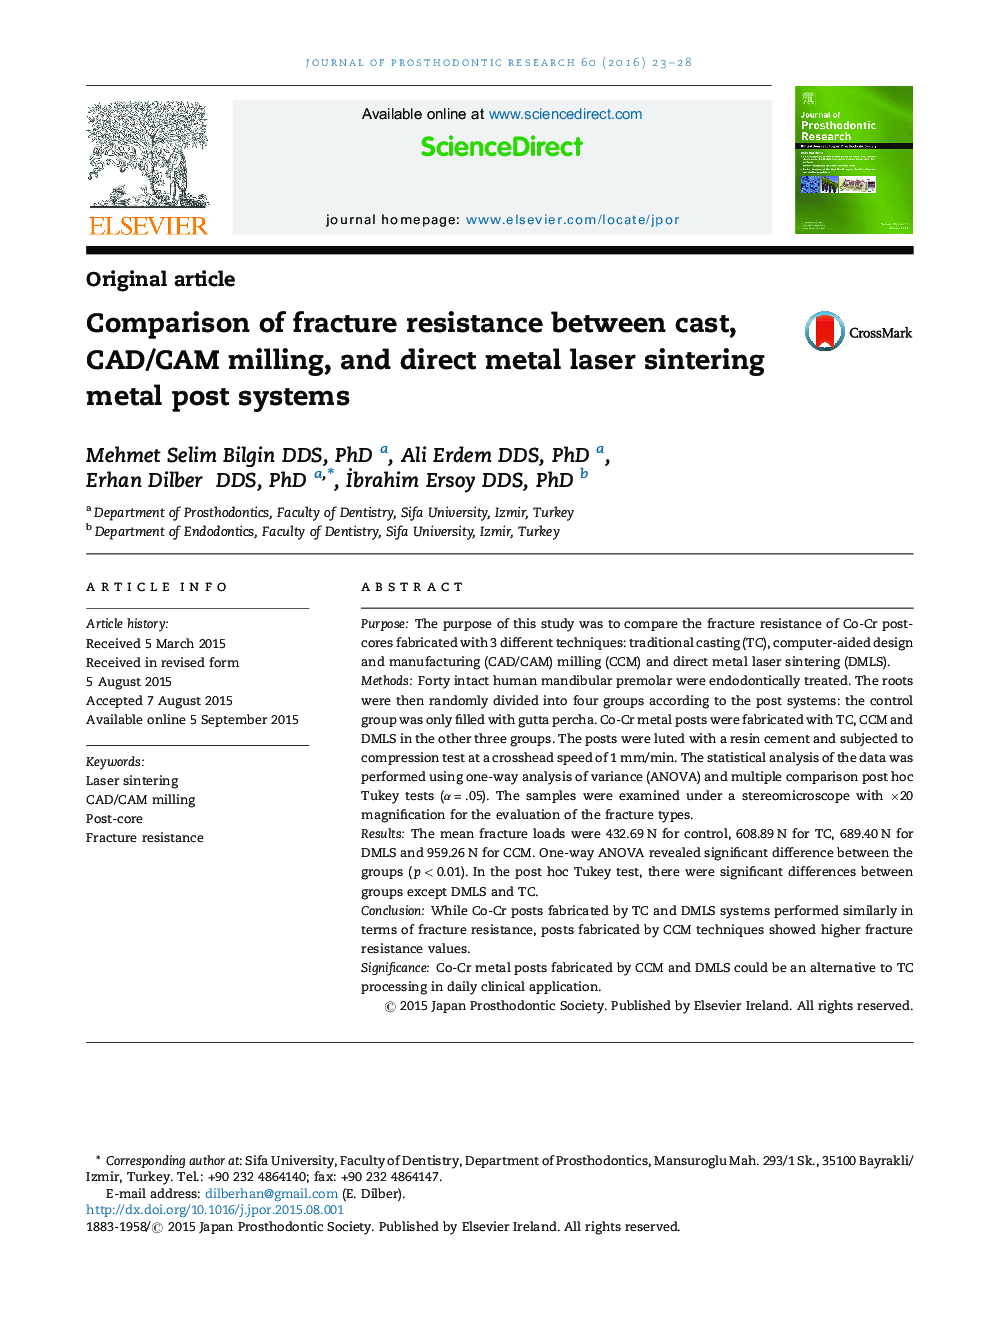 Comparison of fracture resistance between cast, CAD/CAM milling, and direct metal laser sintering metal post systems